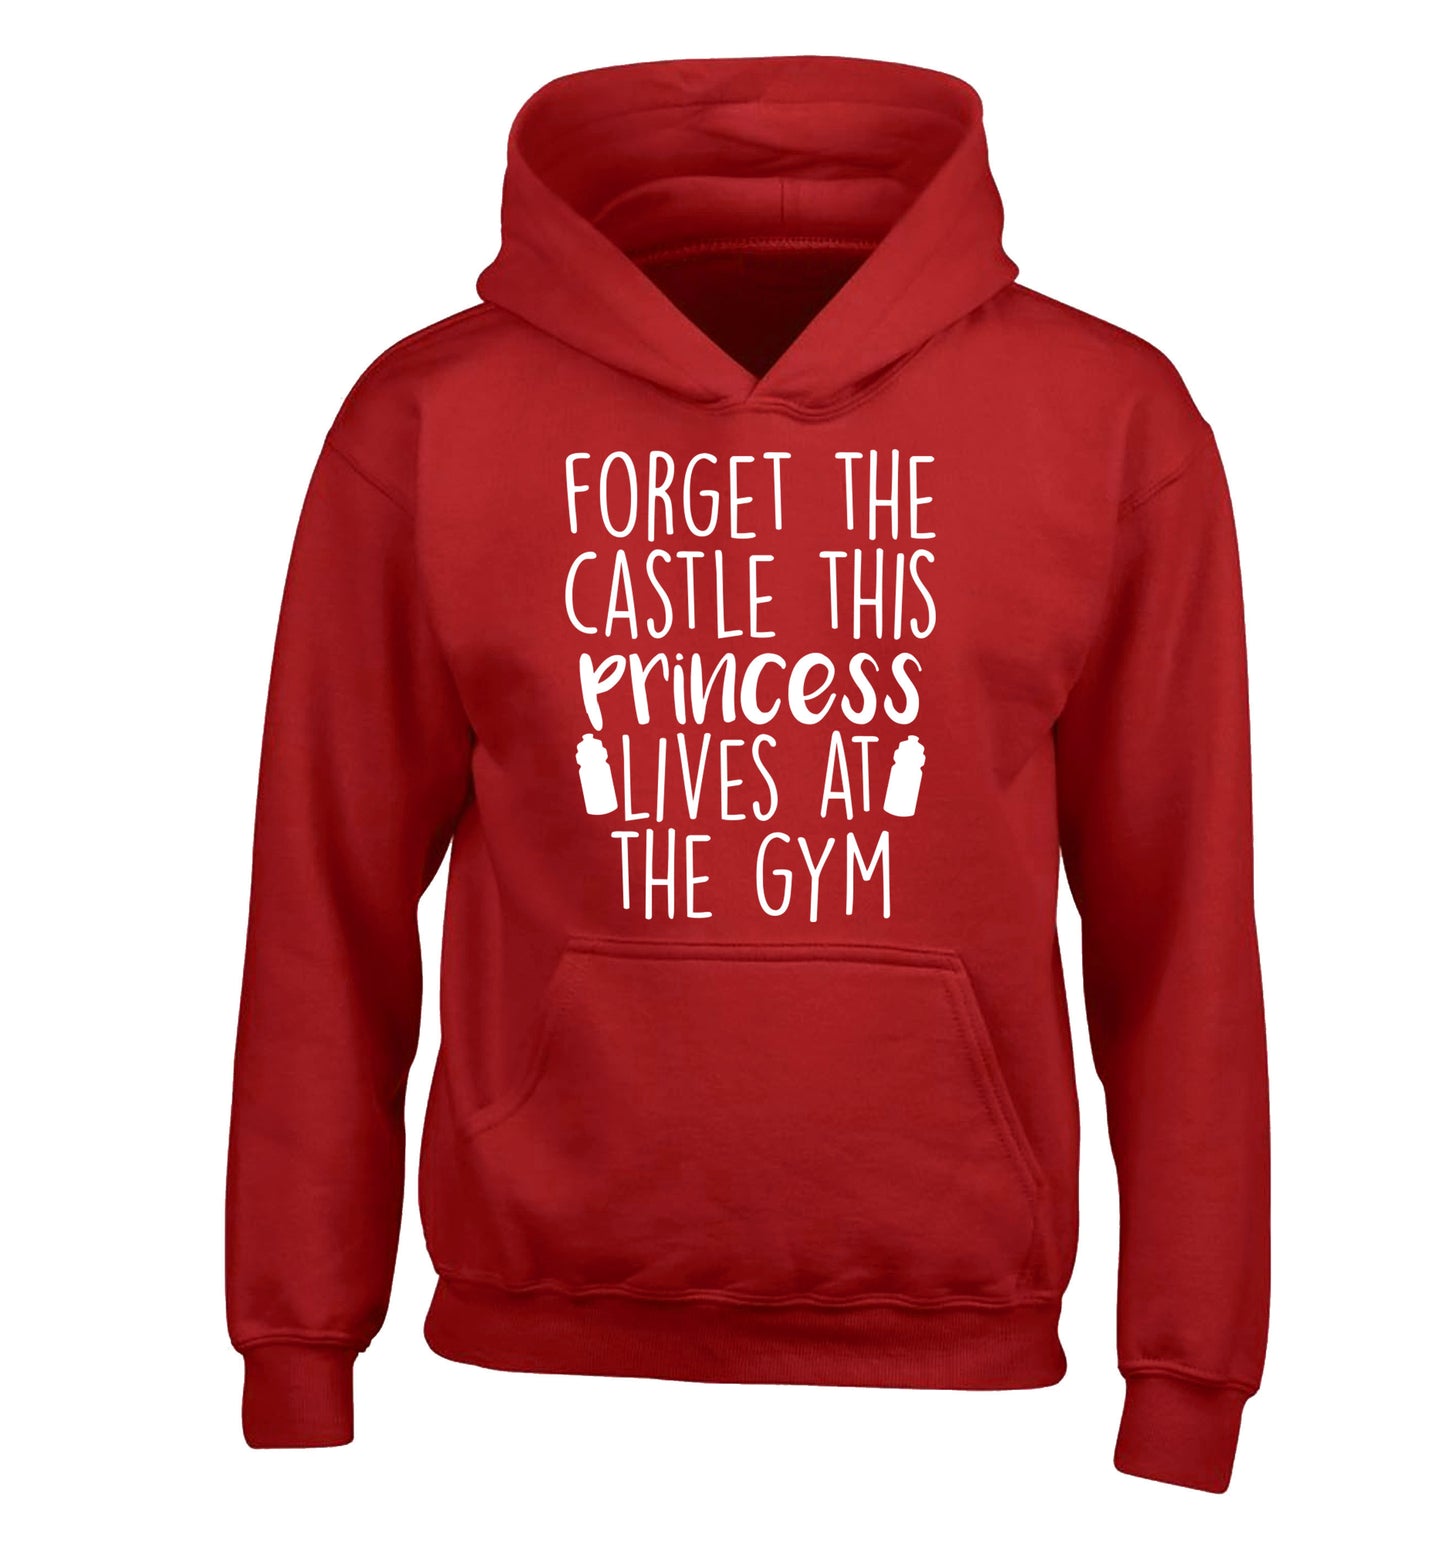 Forget the castle this princess lives at the gym children's red hoodie 12-14 Years